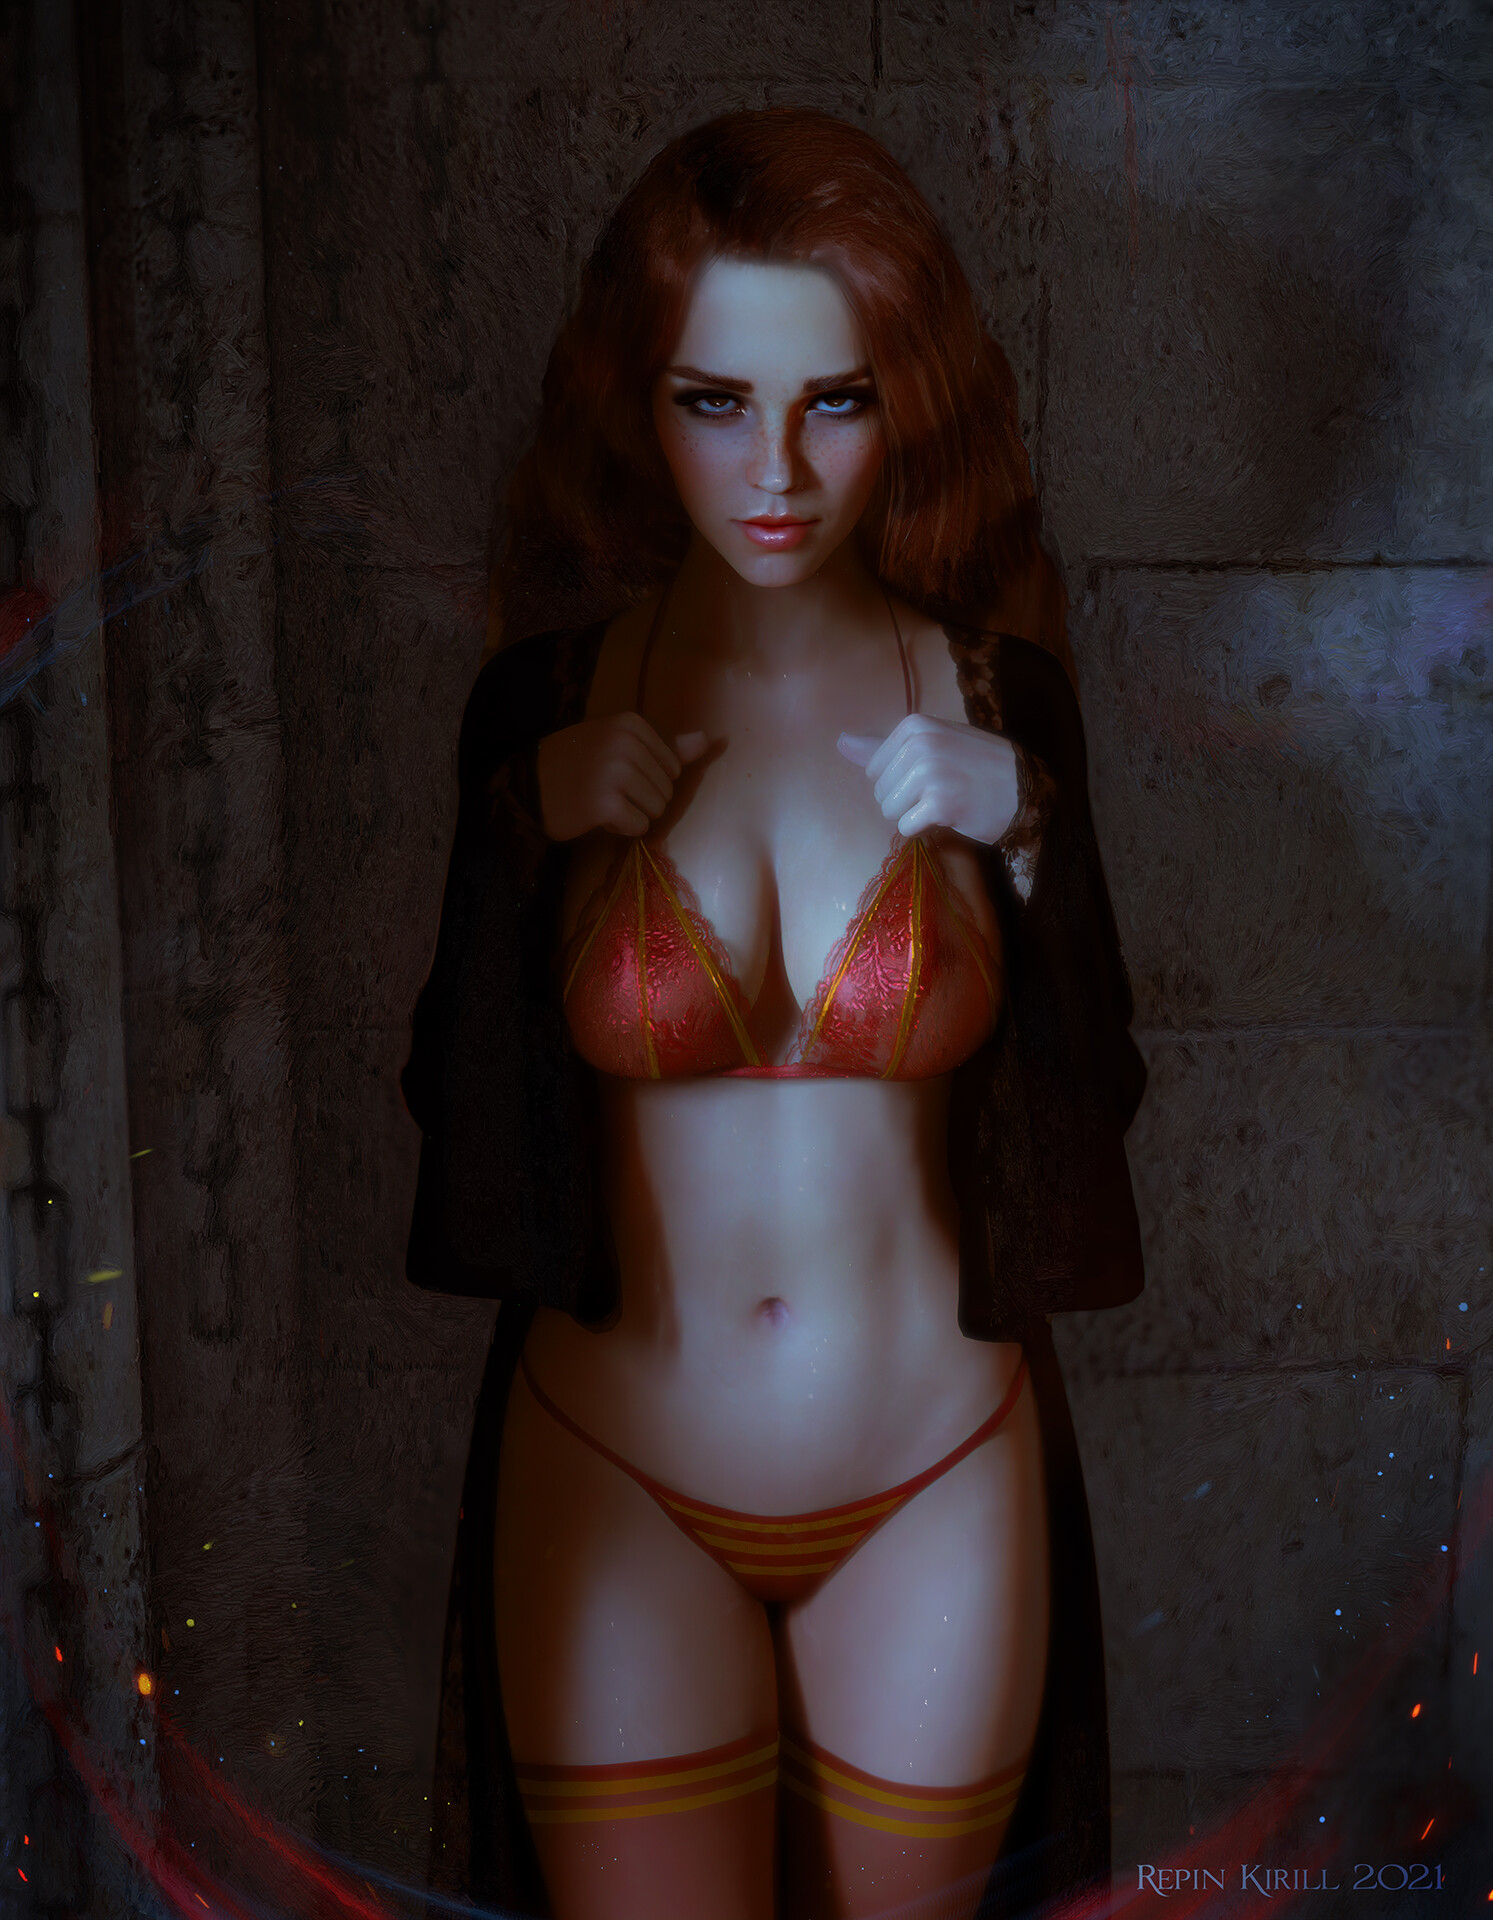 General 1493x1920 Kirill Repin drawing Harry Potter women redhead long hair blue eyes looking at viewer freckles robes black clothing open clothes lingerie lace bra see-through clothing nipples through clothing panties thigh-highs stockings indoors chains